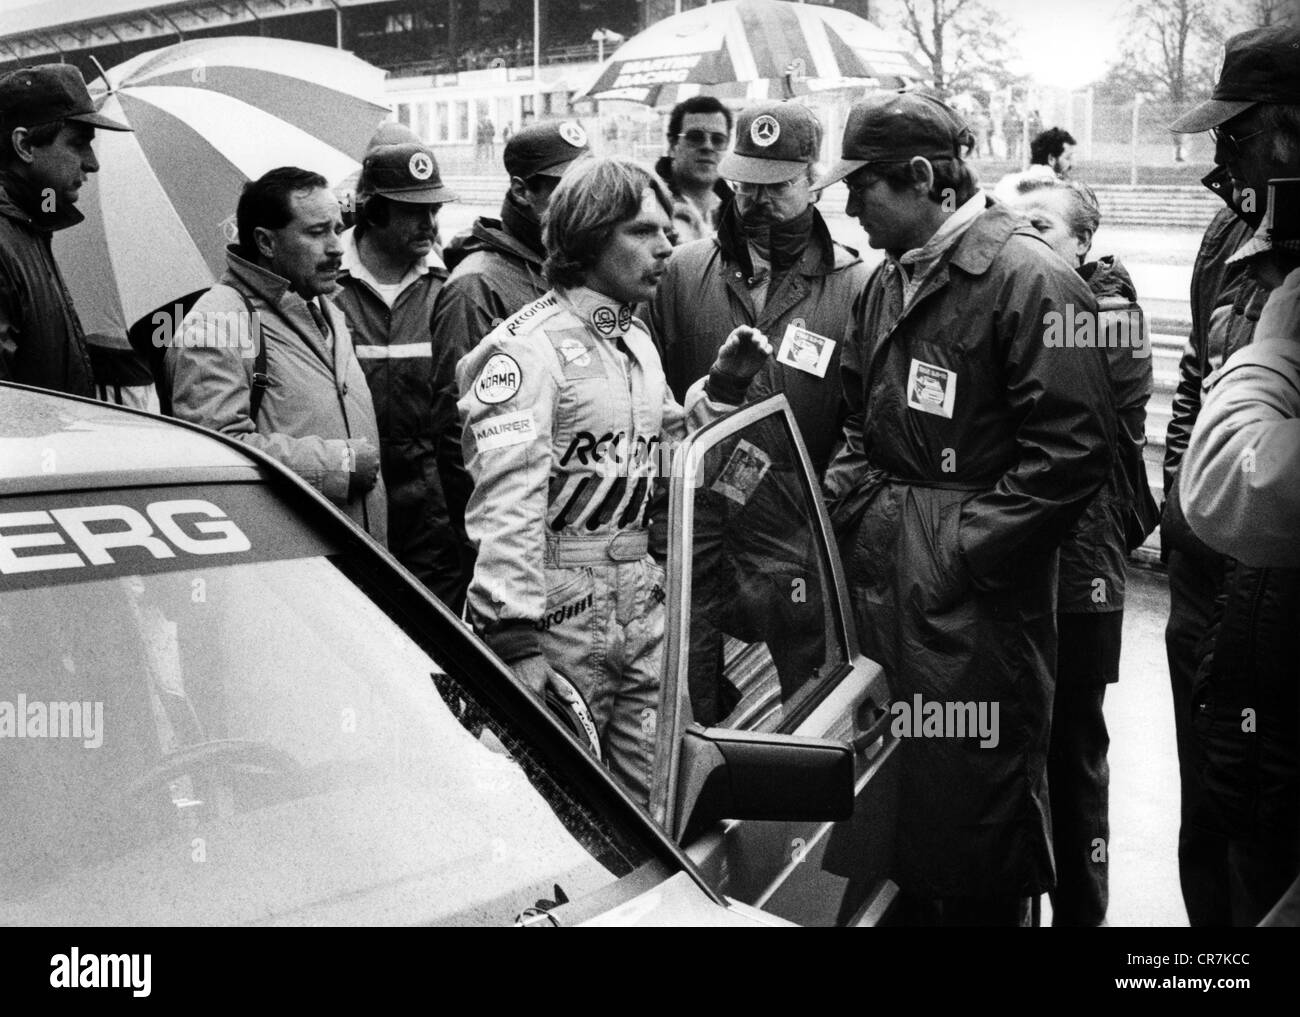 Rosberg, Keijo Erik 'Keke', * 6.12.1948, Finnish racing driver and businessman, on Mercedes-Benz 190 E at the opening race of the new the Nuerburgring, 12.5.1984, Stock Photo